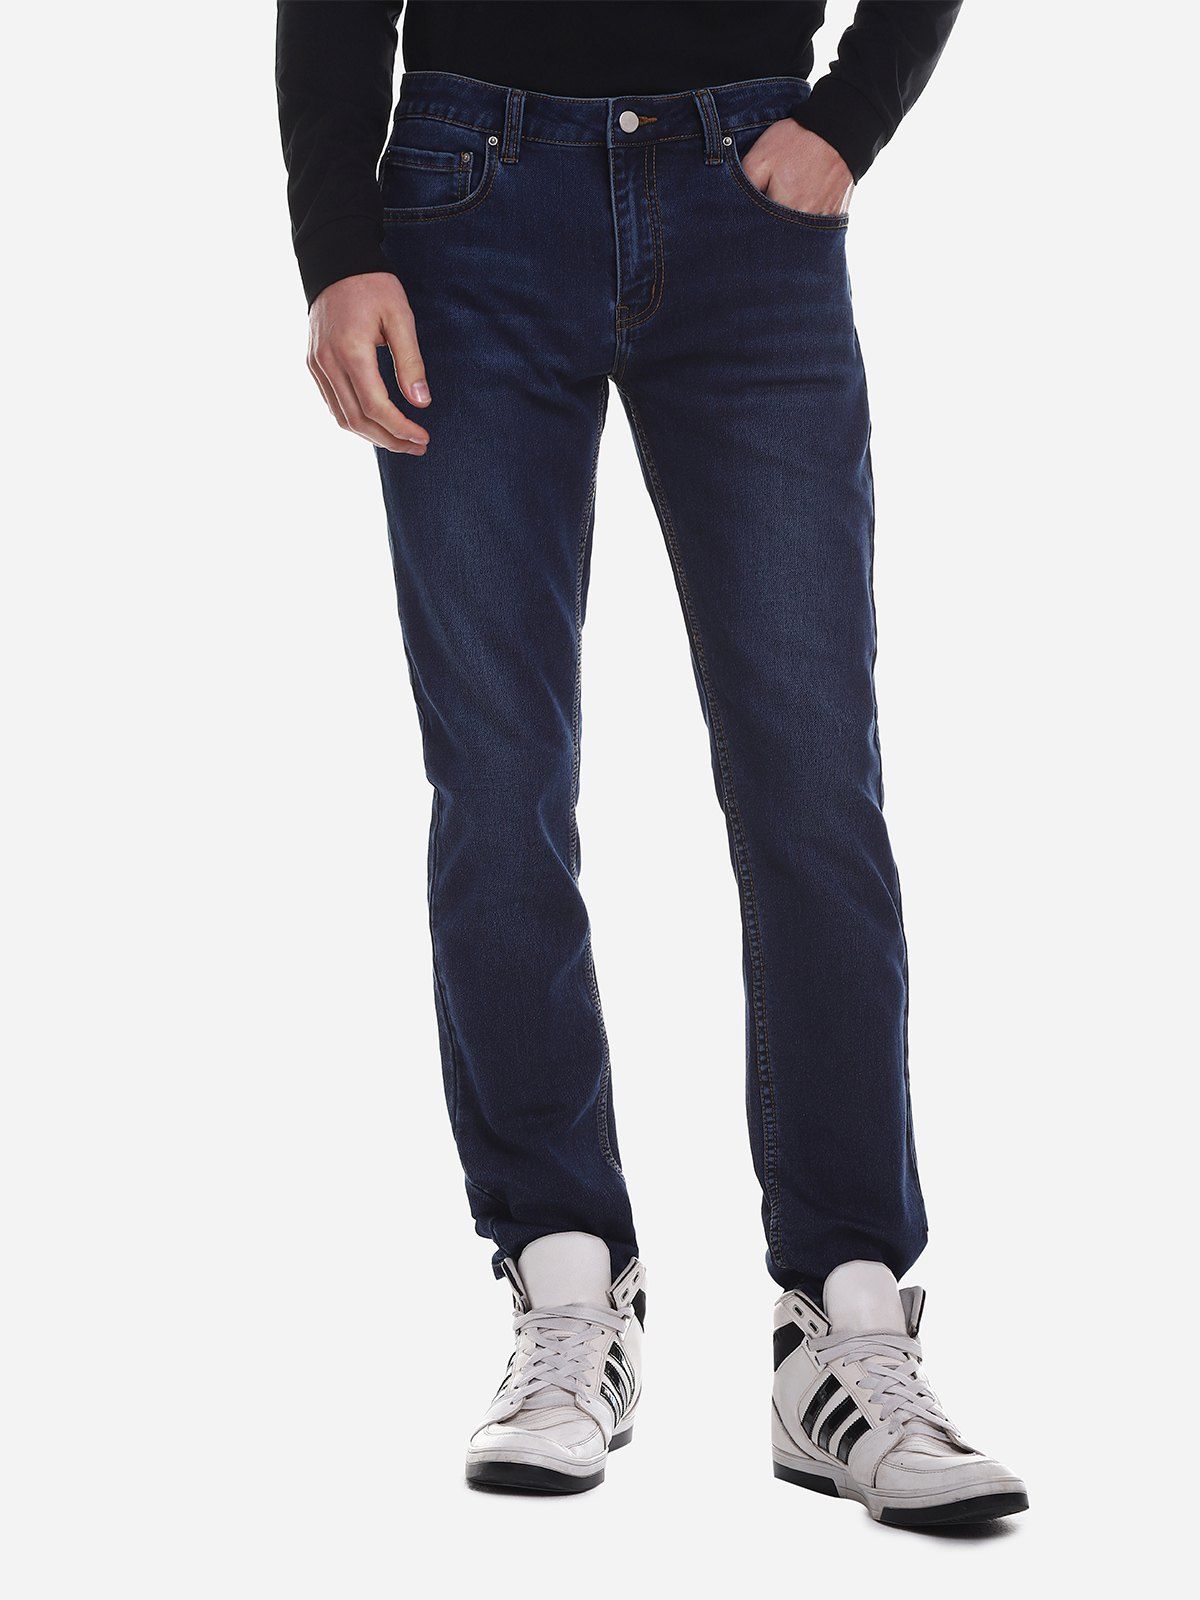 Hot ZAN.STYLE Mid Rise Waist Washed Jeans  